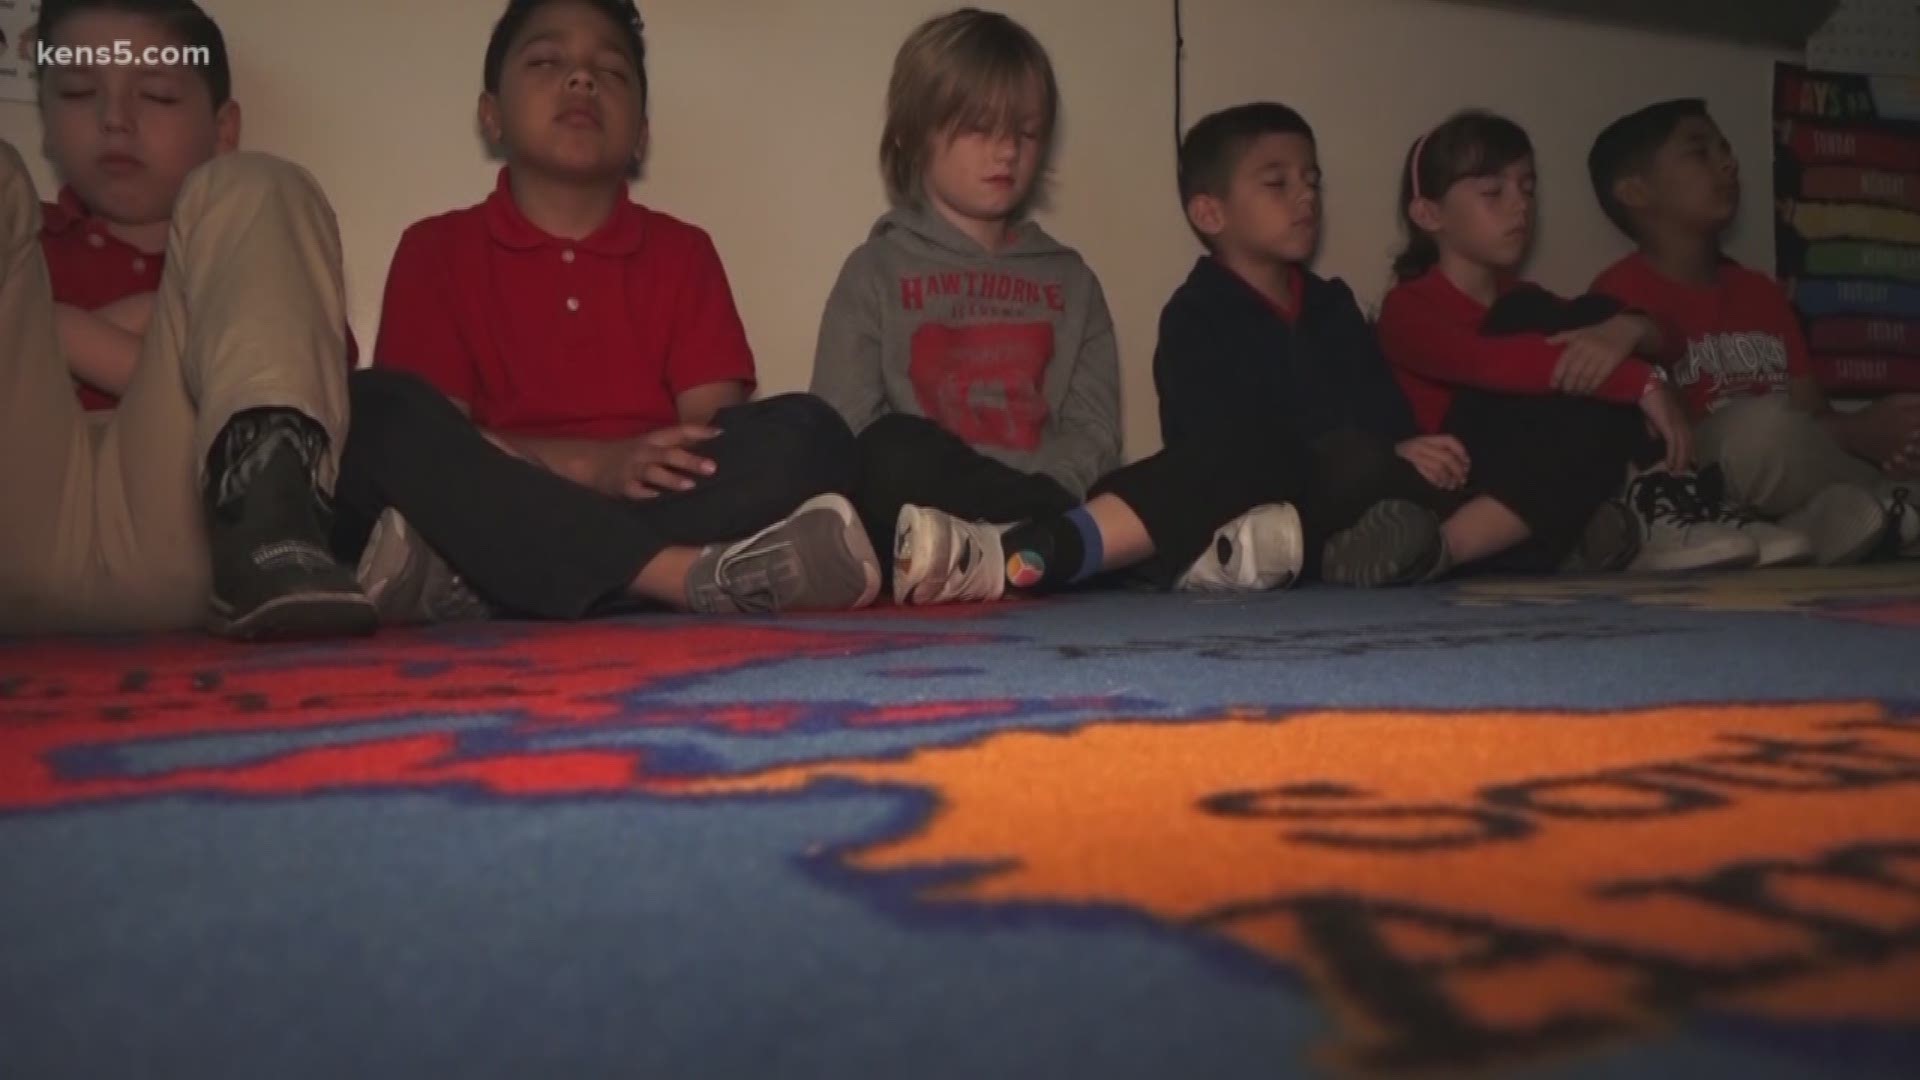 Many people credit daily meditation as a way to cope with stress, improve overall mood, and boost productivity. But one San Antonio elementary school teacher is proving that meditation is not just for adults.